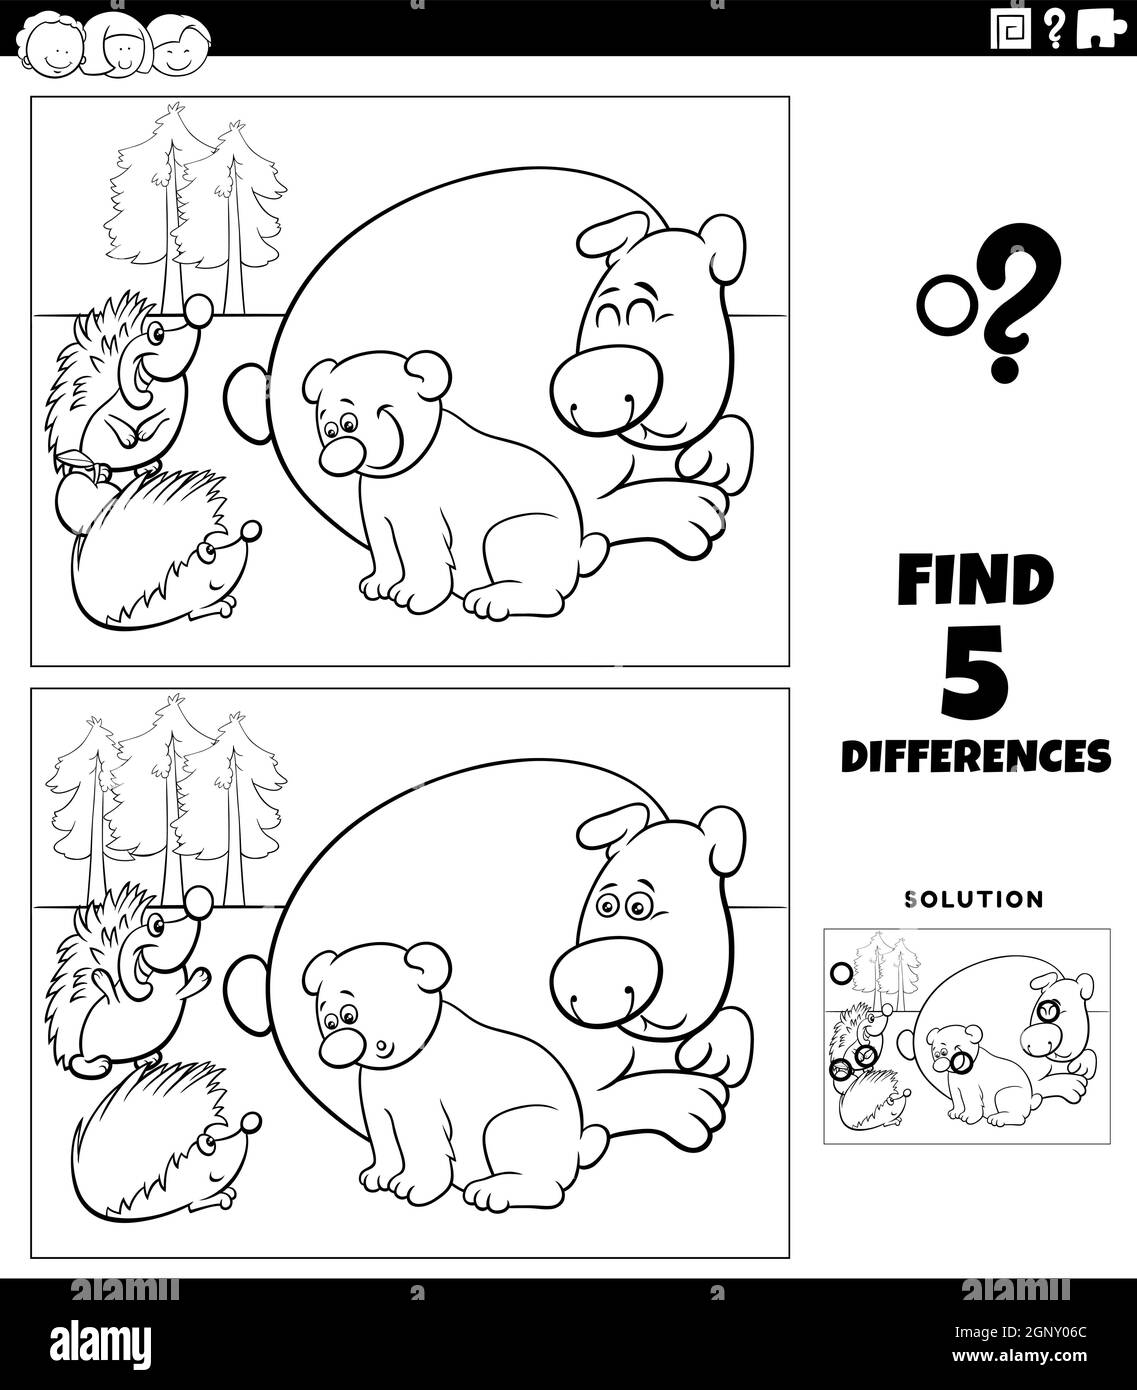 differences game with bears and hedgehogs coloring book page Stock Vector